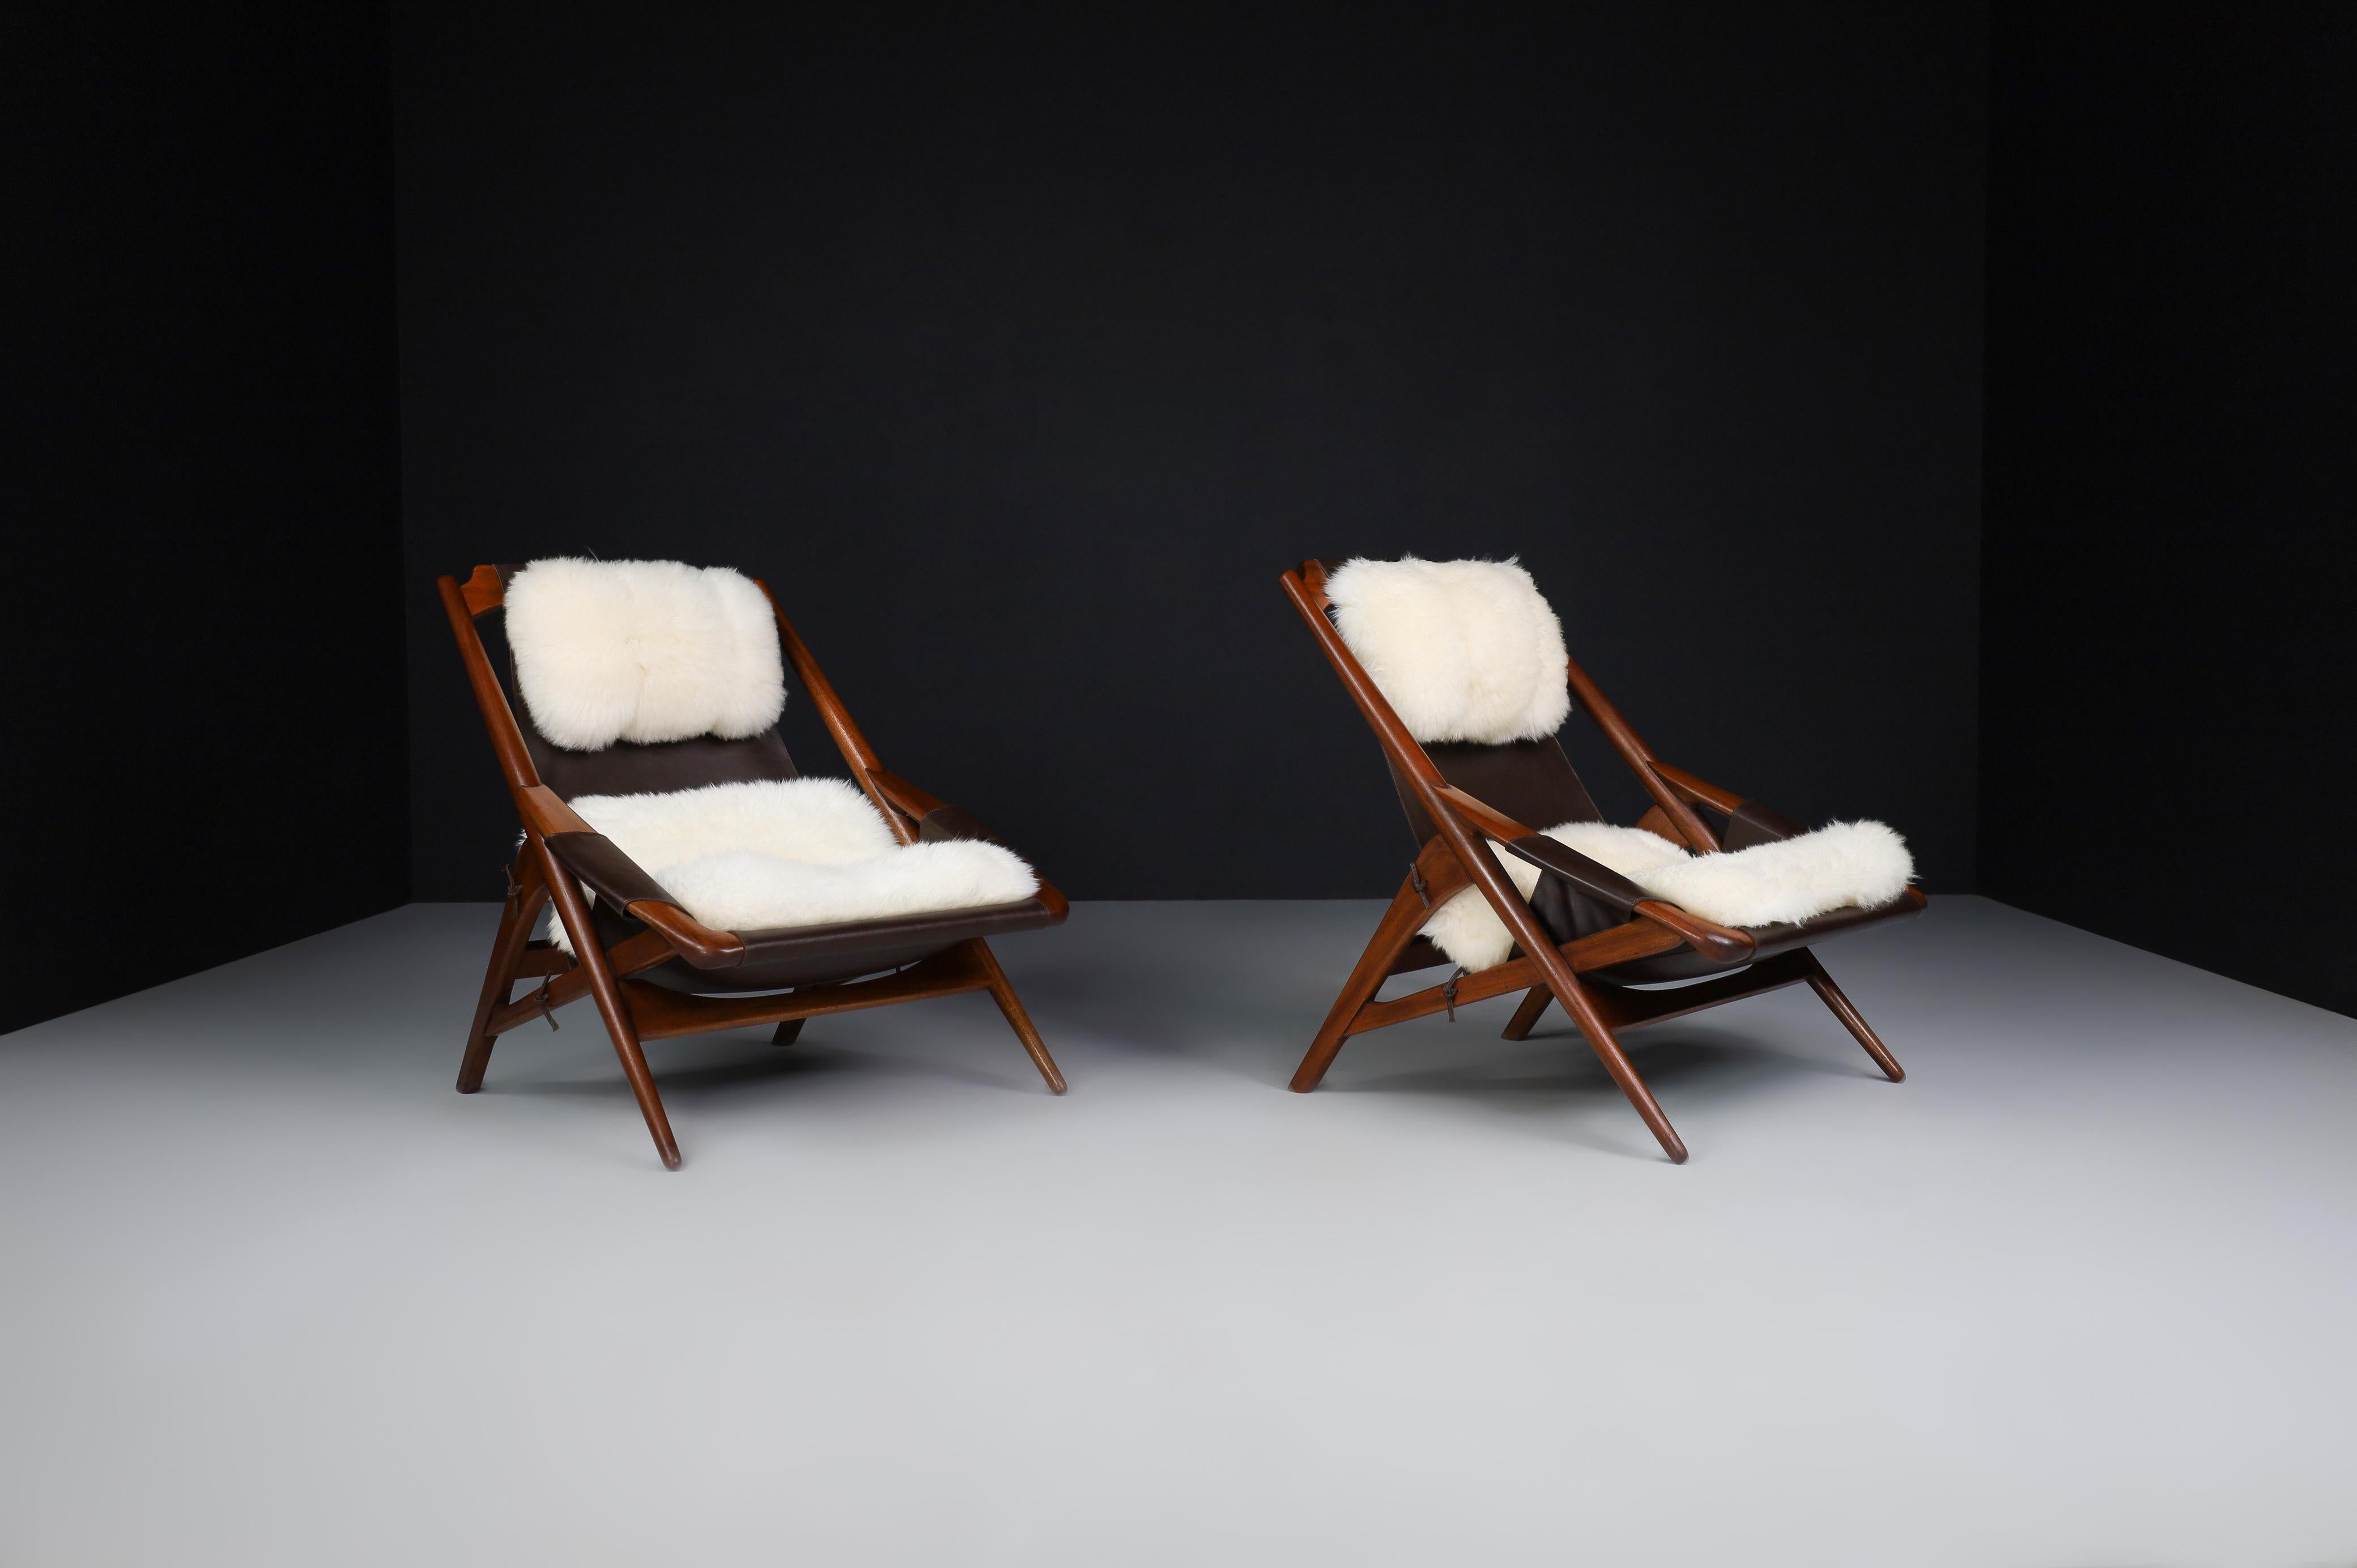 W.D. Andersag Lounge Chairs Teak and Leather, Italy, 1959 For Sale 7